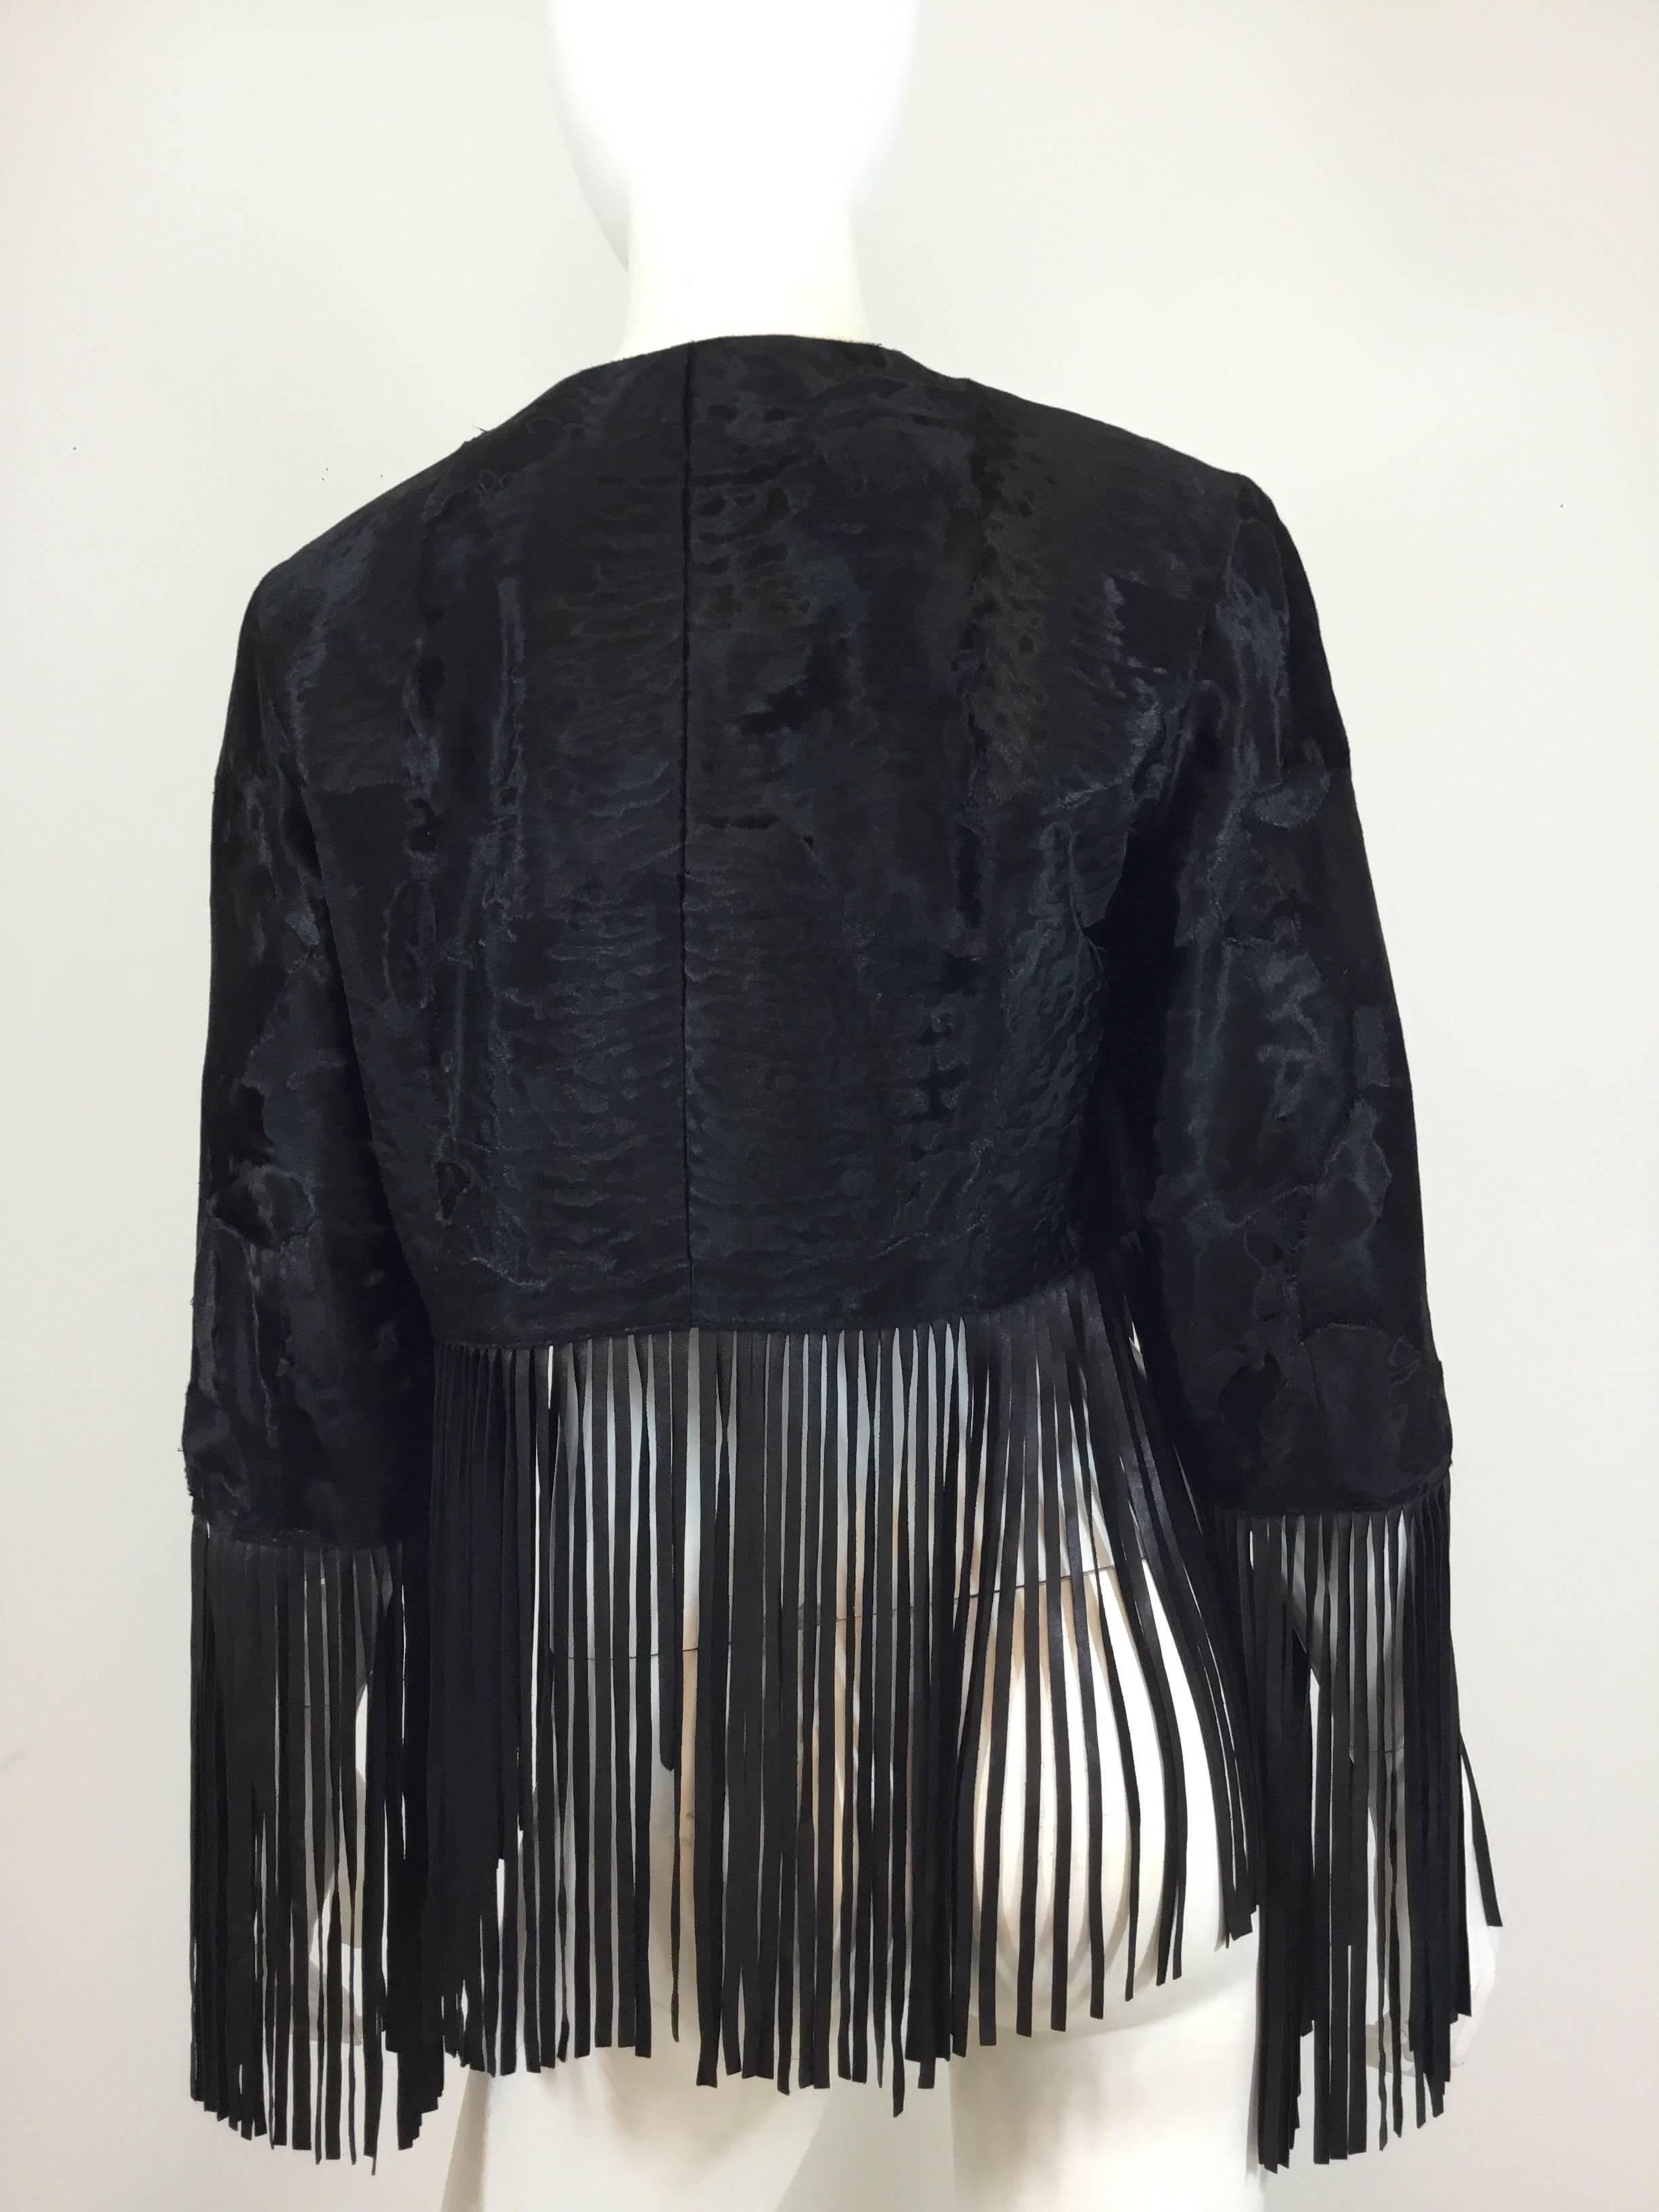 Black Bisang Couture Broadtail Jacket with Leather Fringe For Sale